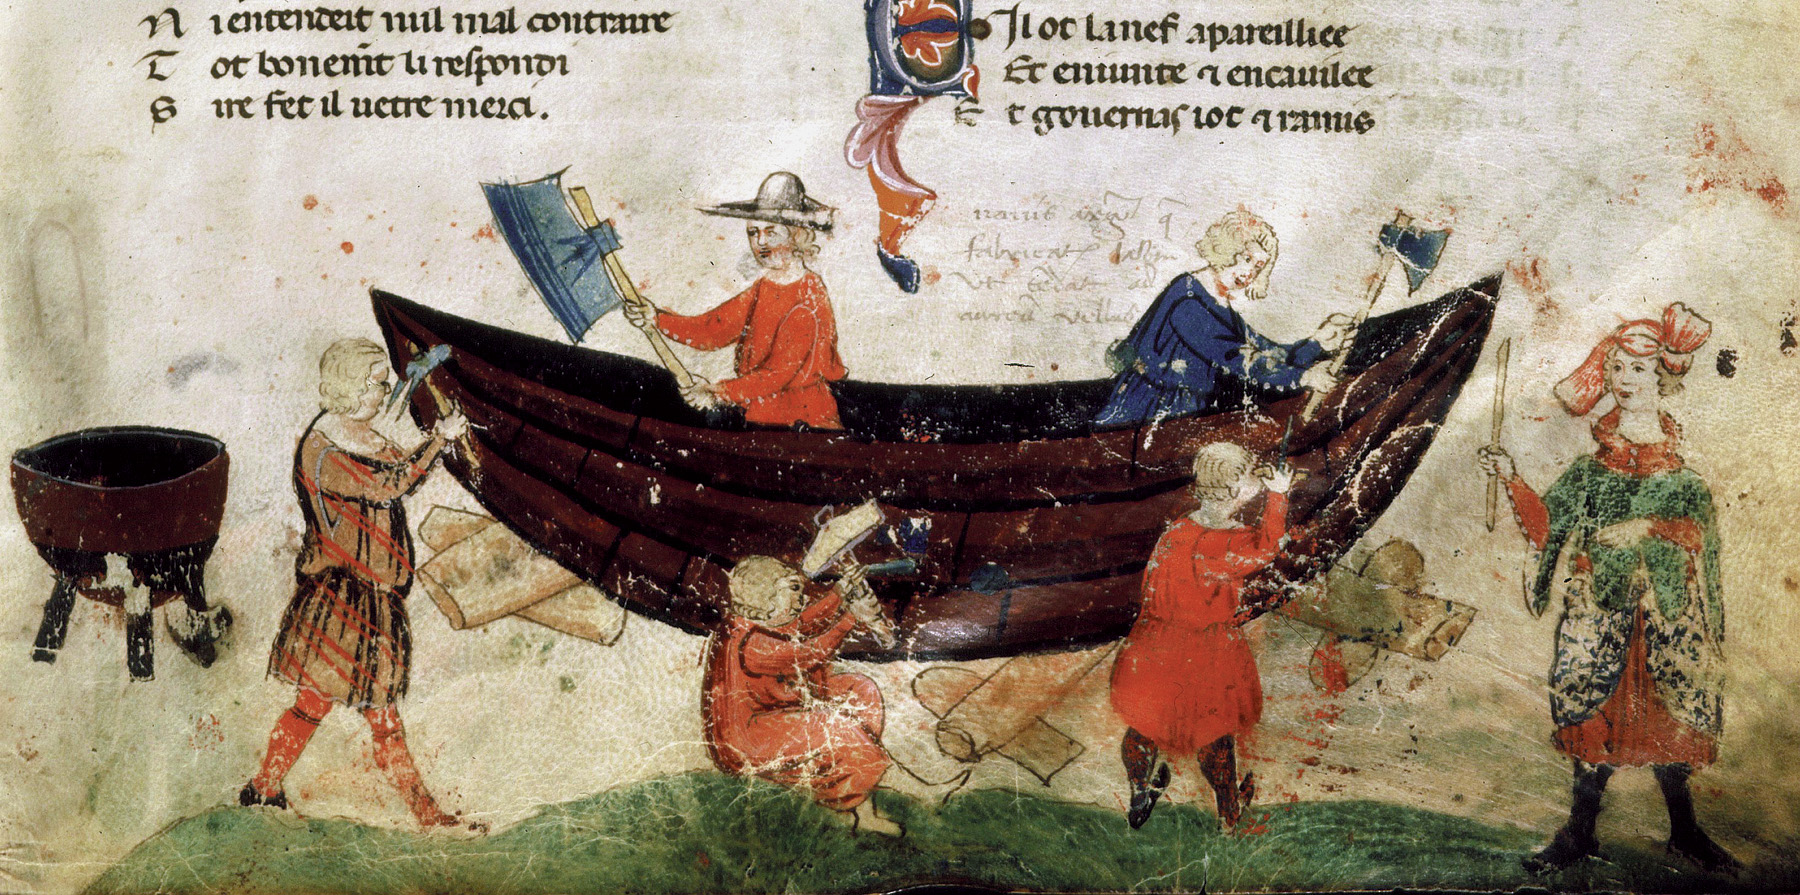 A 14th-century manuscript illustration shows some of the skills and tools of ship building.  The craft shown here is tiny, but naval construction actually took large strides in this period.